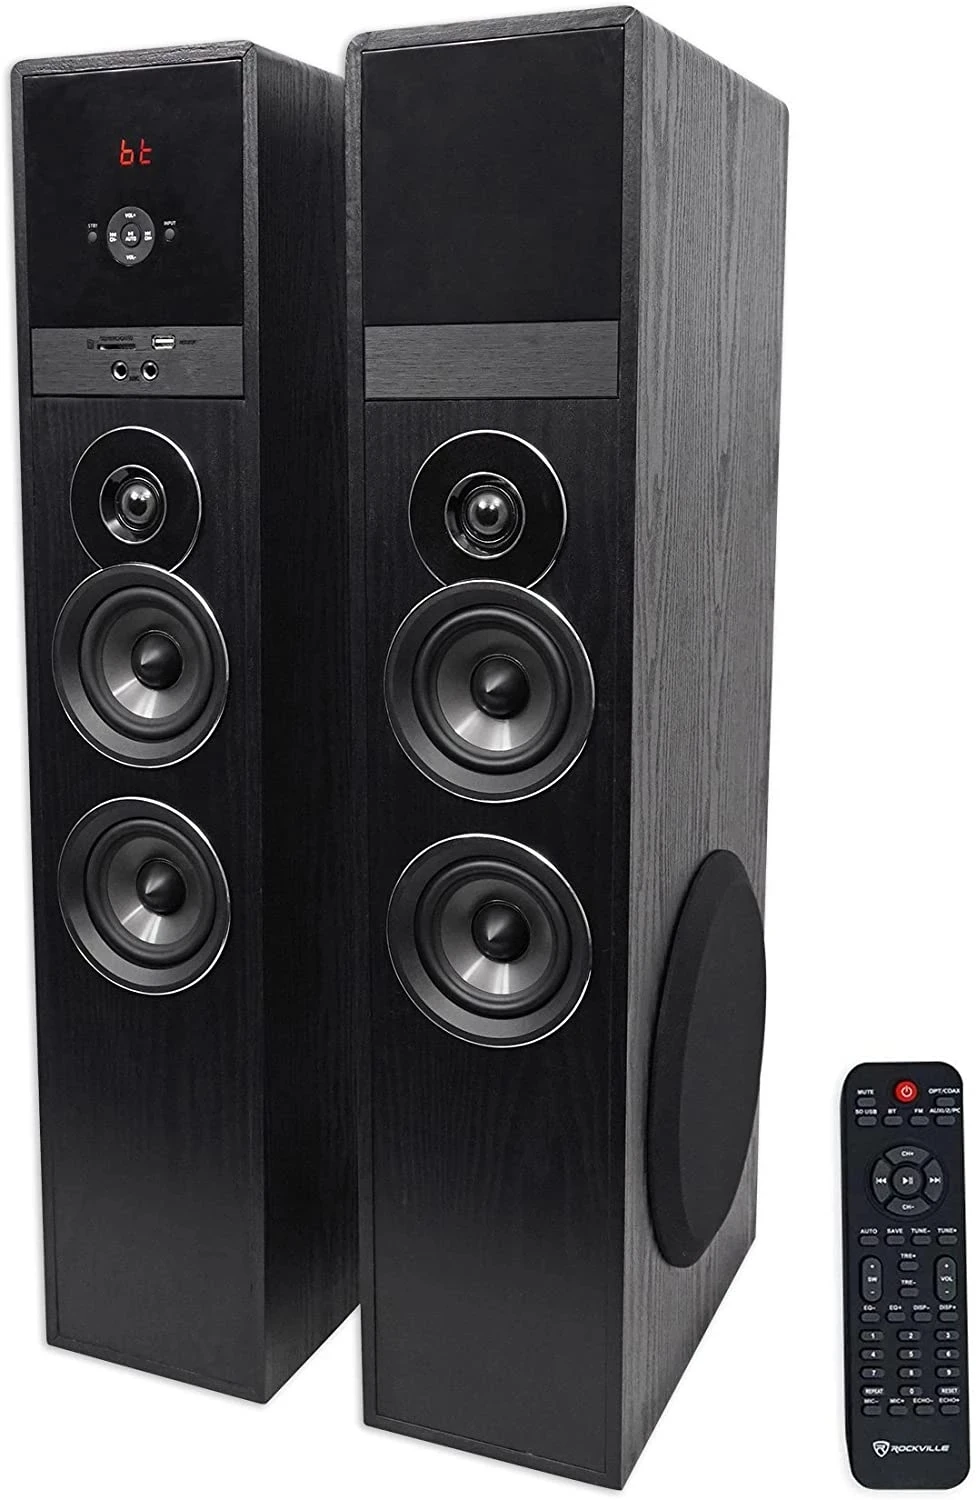 2022 New Rockville TM80B Black Home Theater System Tower Speakers 8